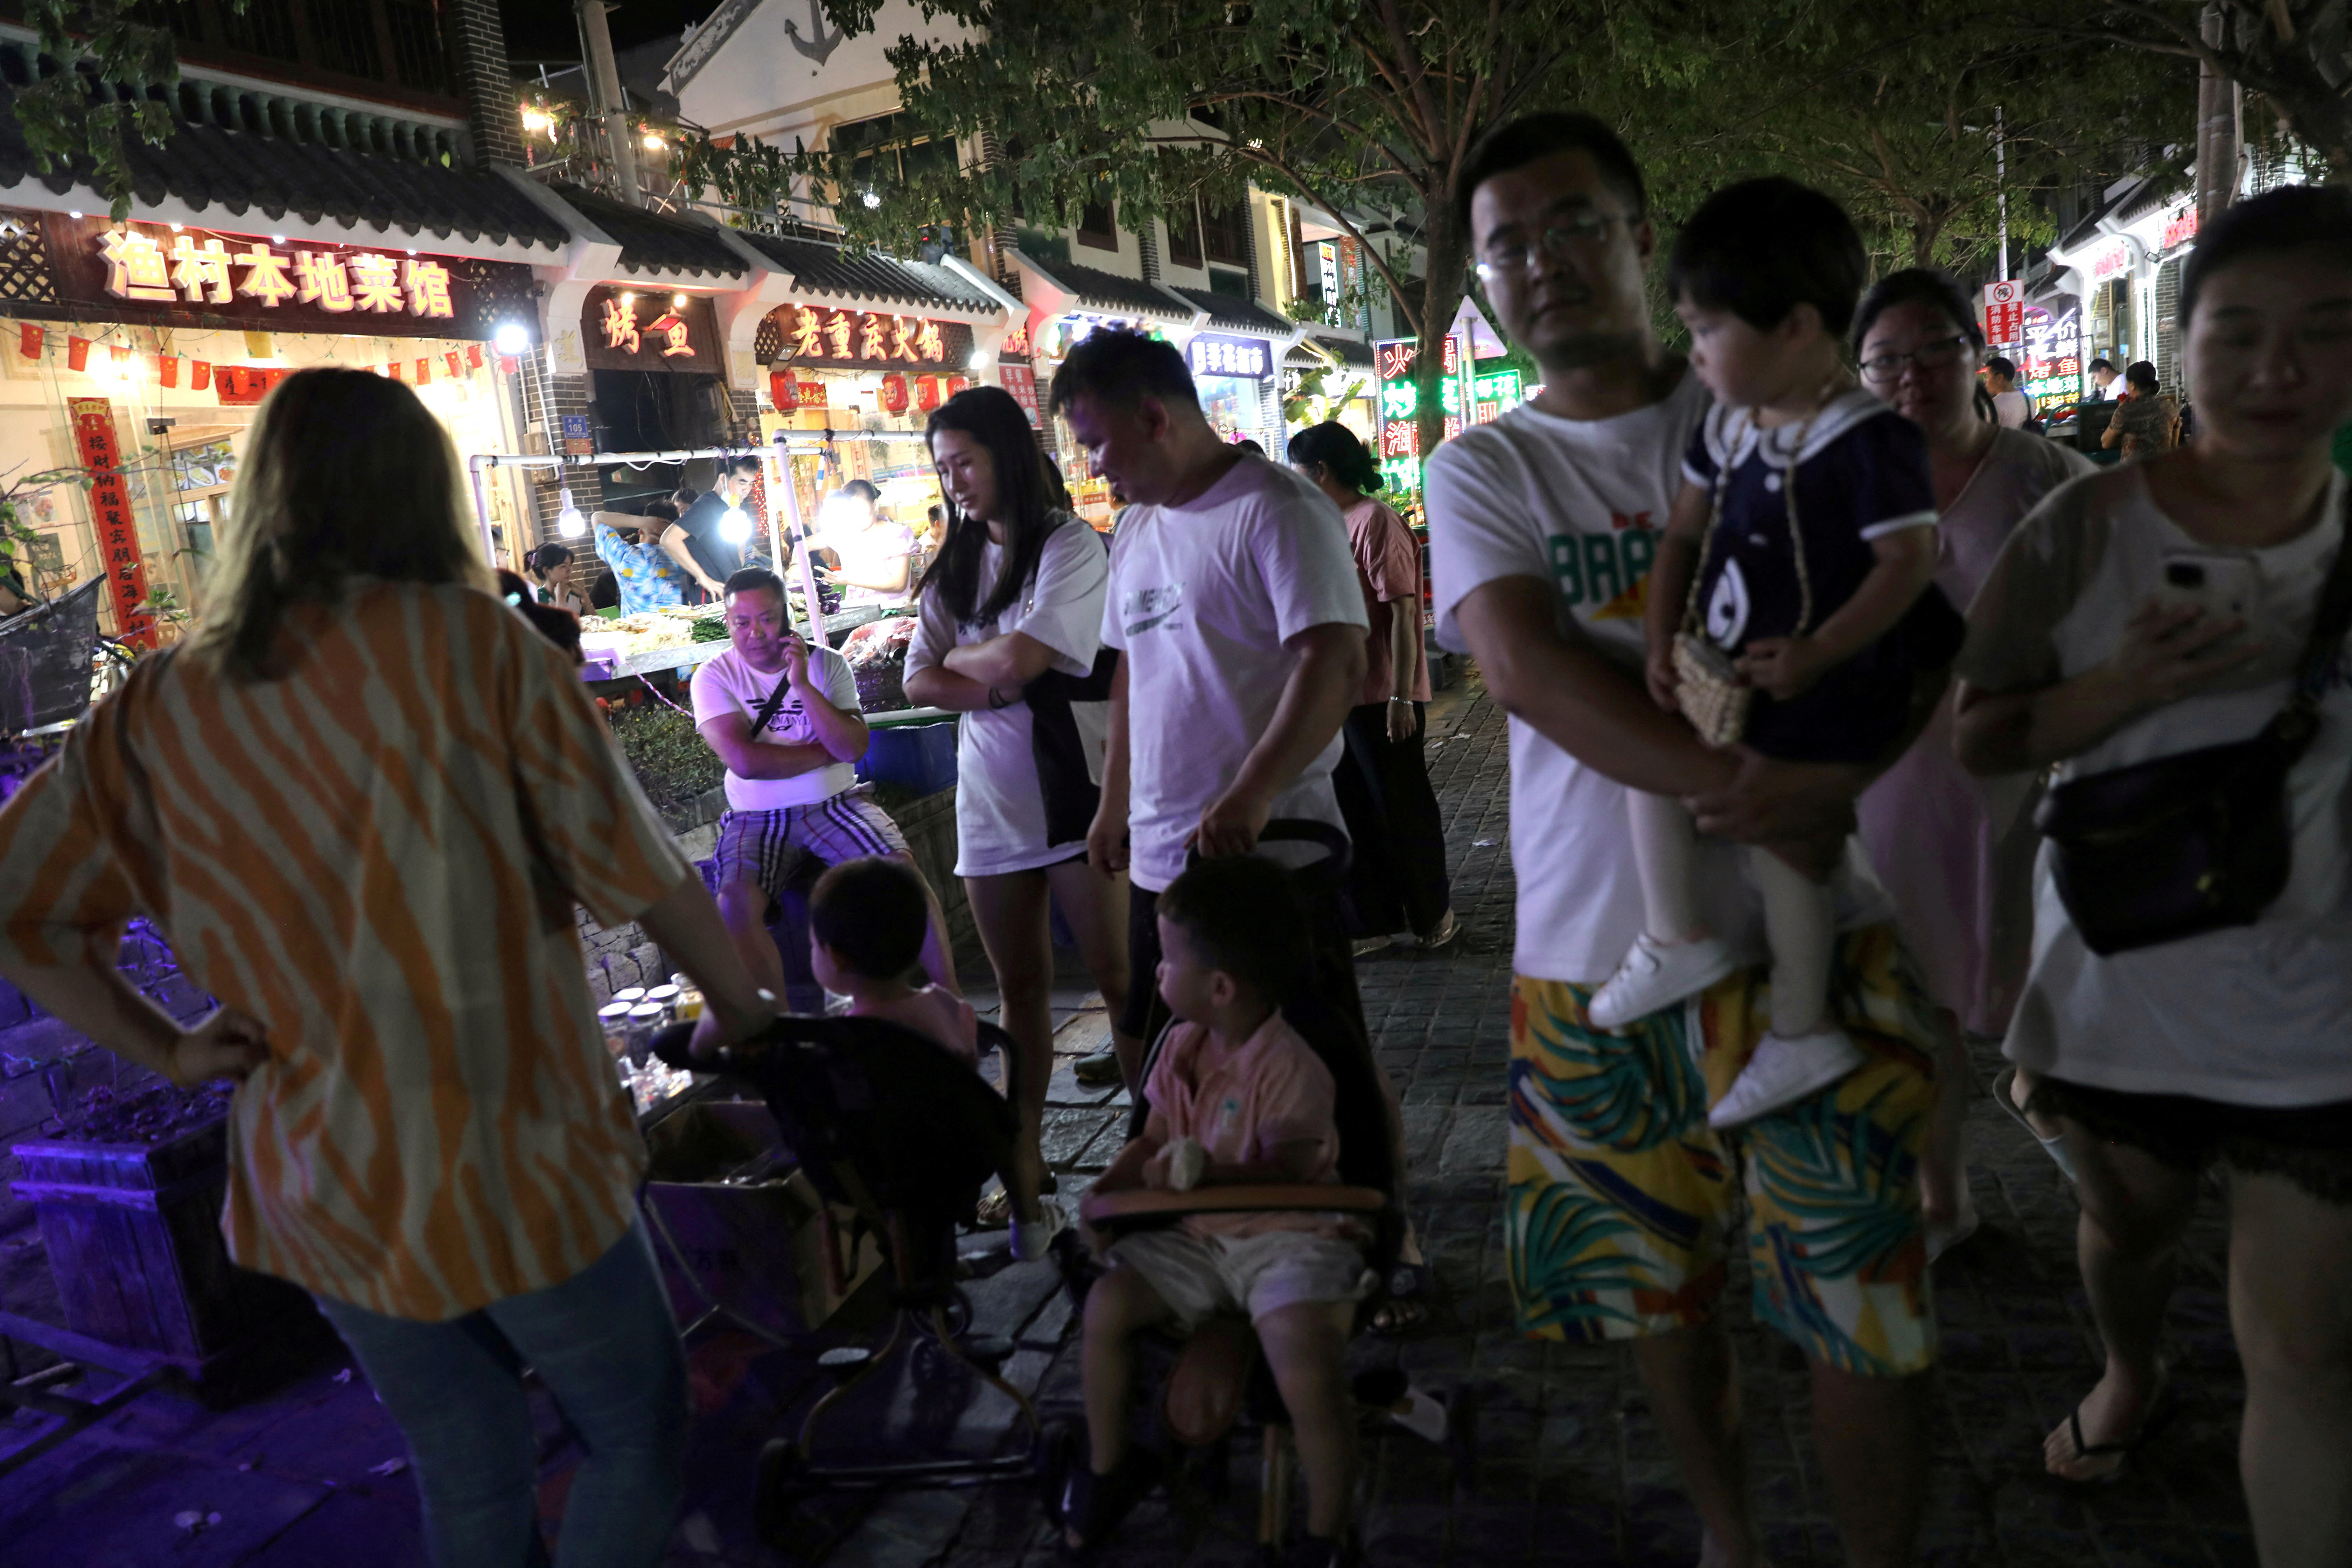 People are seen next to restaurants at Houhai village in Sanya